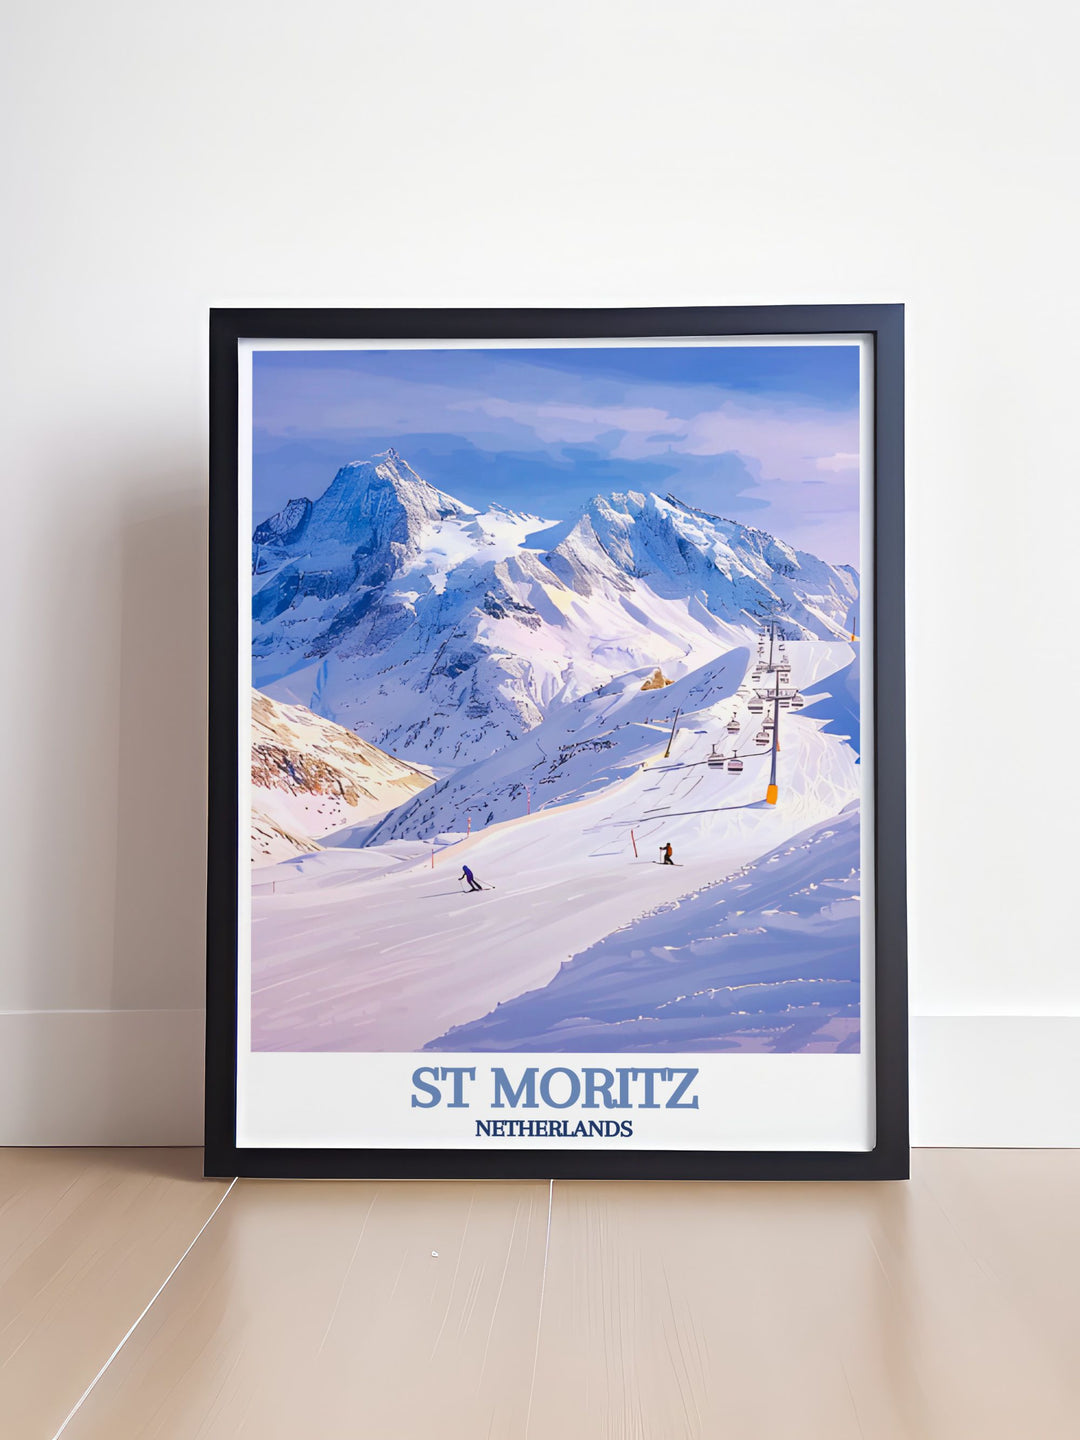 St Moritz and Corviglia are beautifully illustrated in this poster, celebrating their unique blend of history, luxury, and alpine adventure.